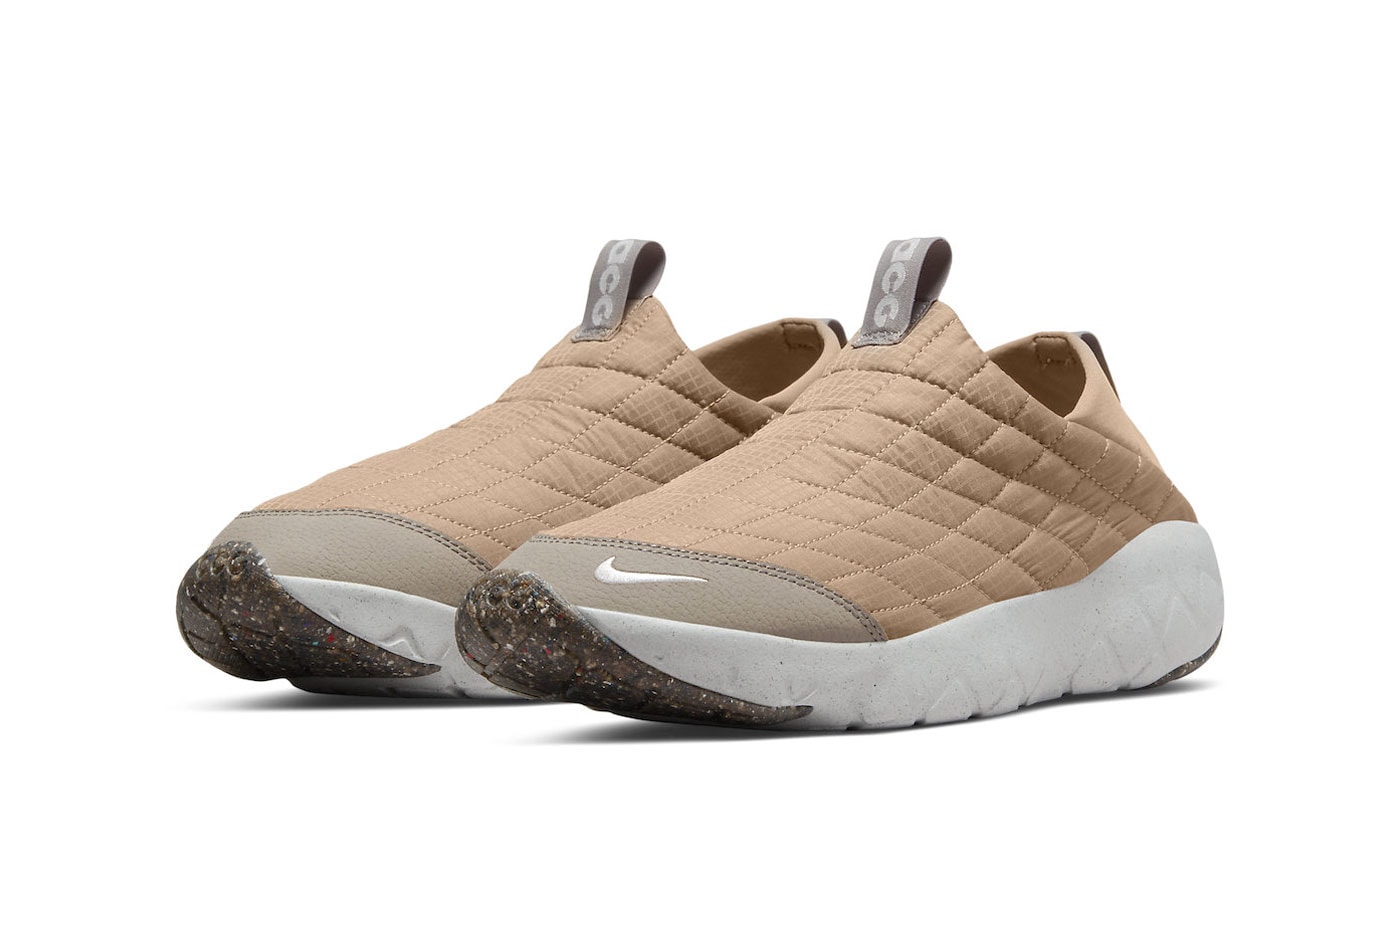 Nike ACG Air Moc 3.5 Hemp Crater Foam White enigma stone recycled material DD2867-200 2022 tan white gray release info 